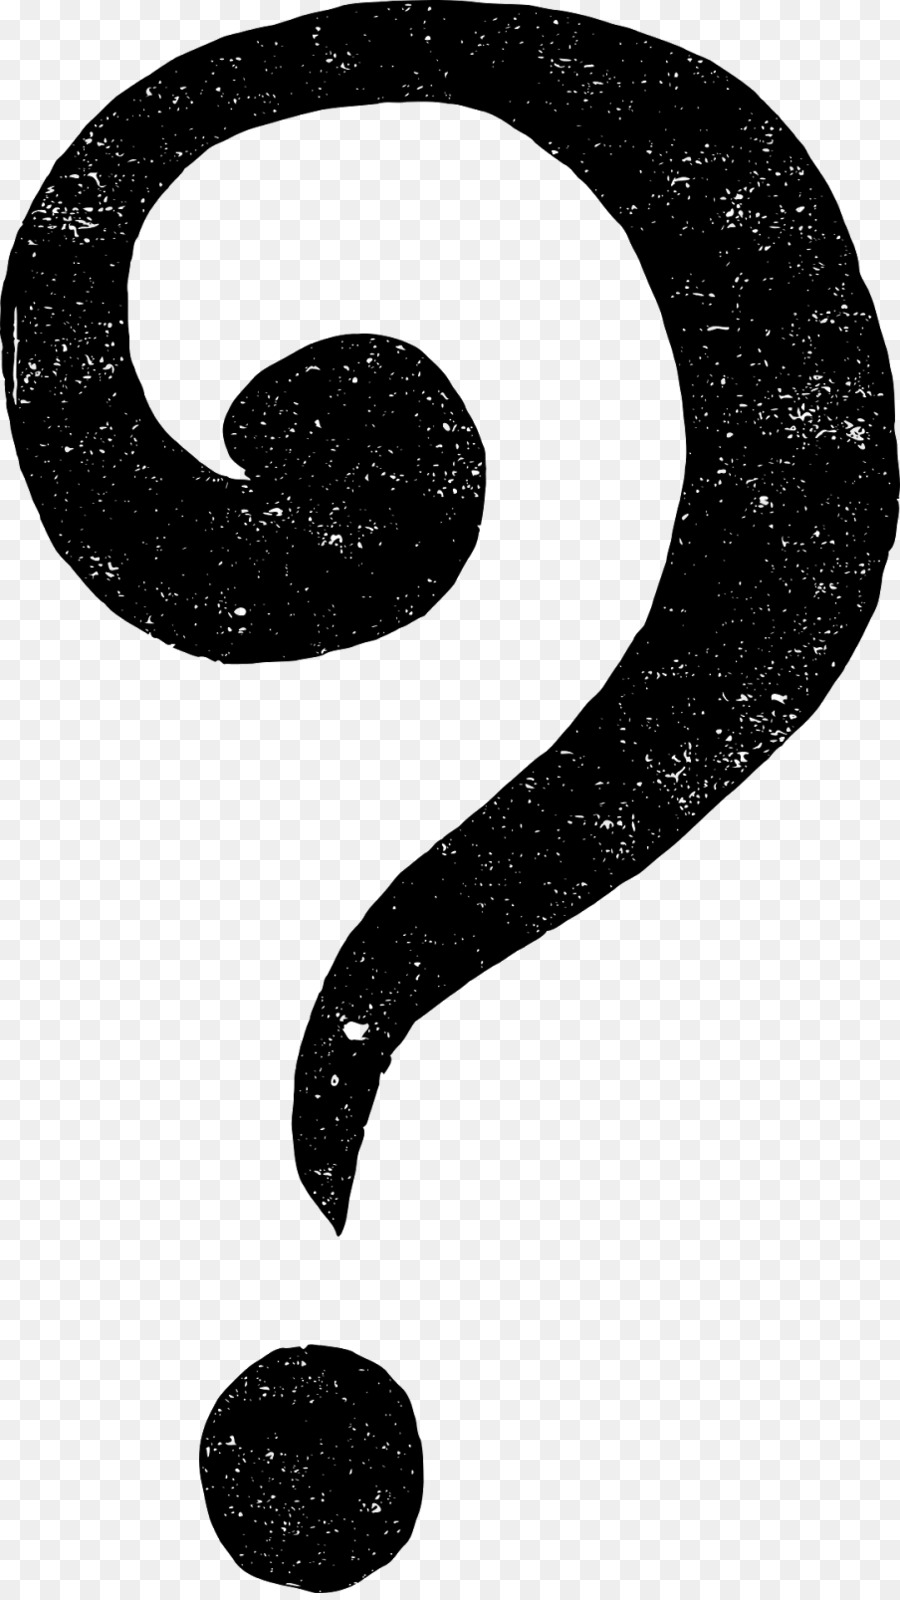 Question mark Clip art - others png download - 904*1600 - Free Transparent Question Mark png Download.